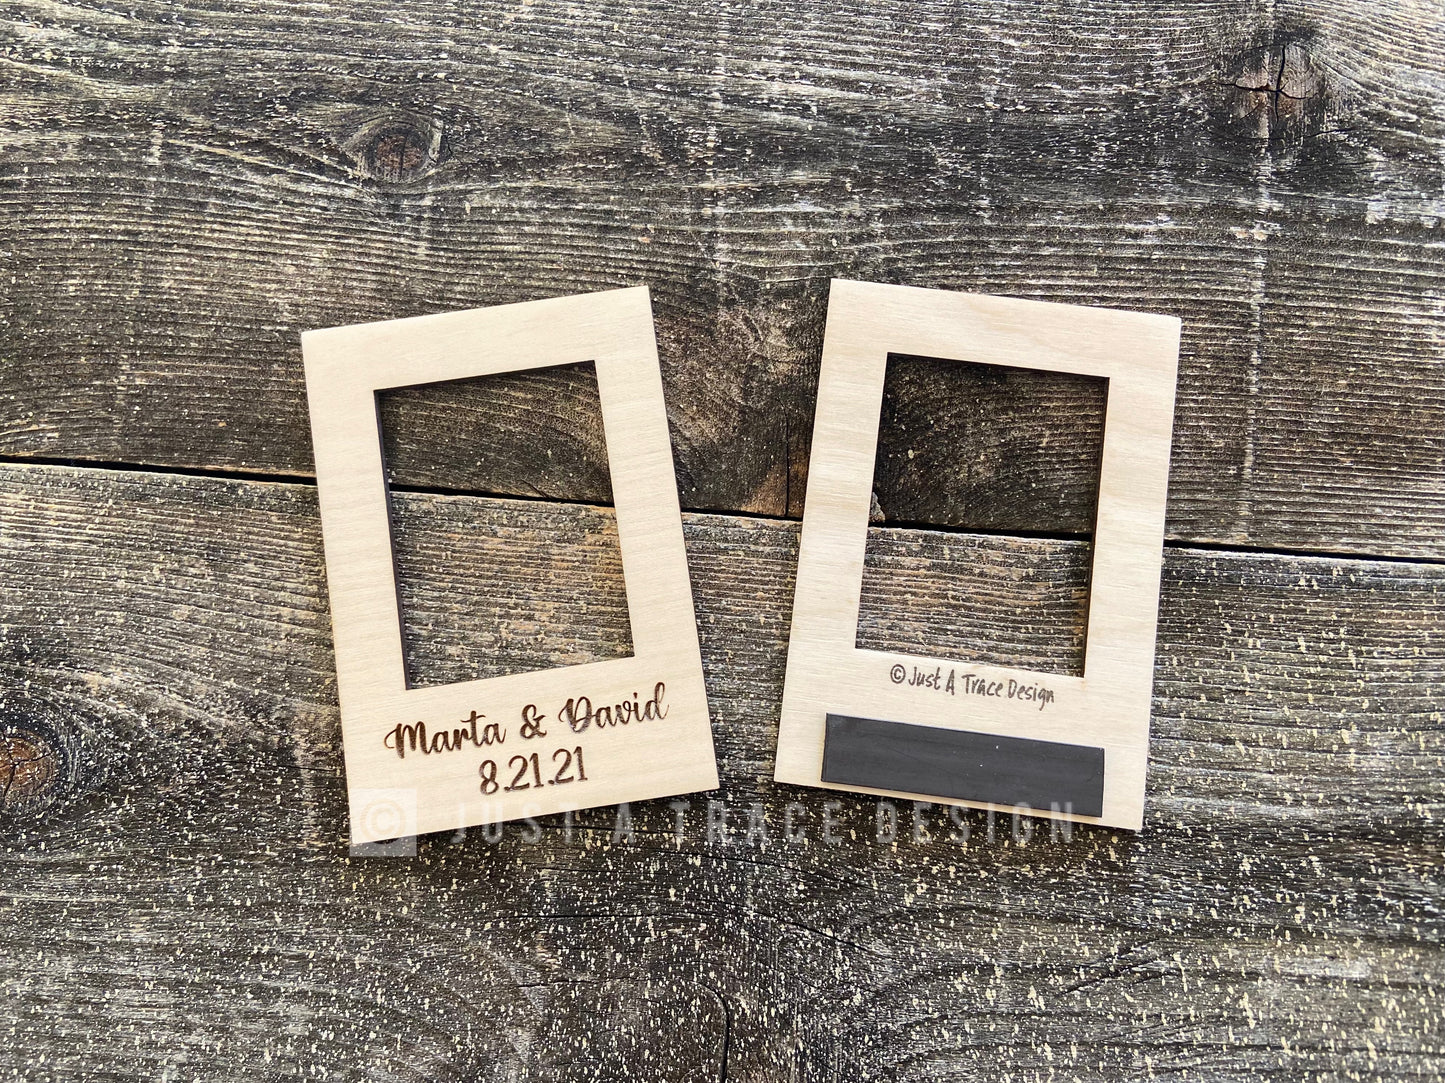 Bulk Mini Personalized Picture Frame, Instax Photo Frame, Wedding Favor, Vacation Frame, Bridesmaid Gift, Refrigerator Magnet, Travel Agent Gift, Bridal Shower